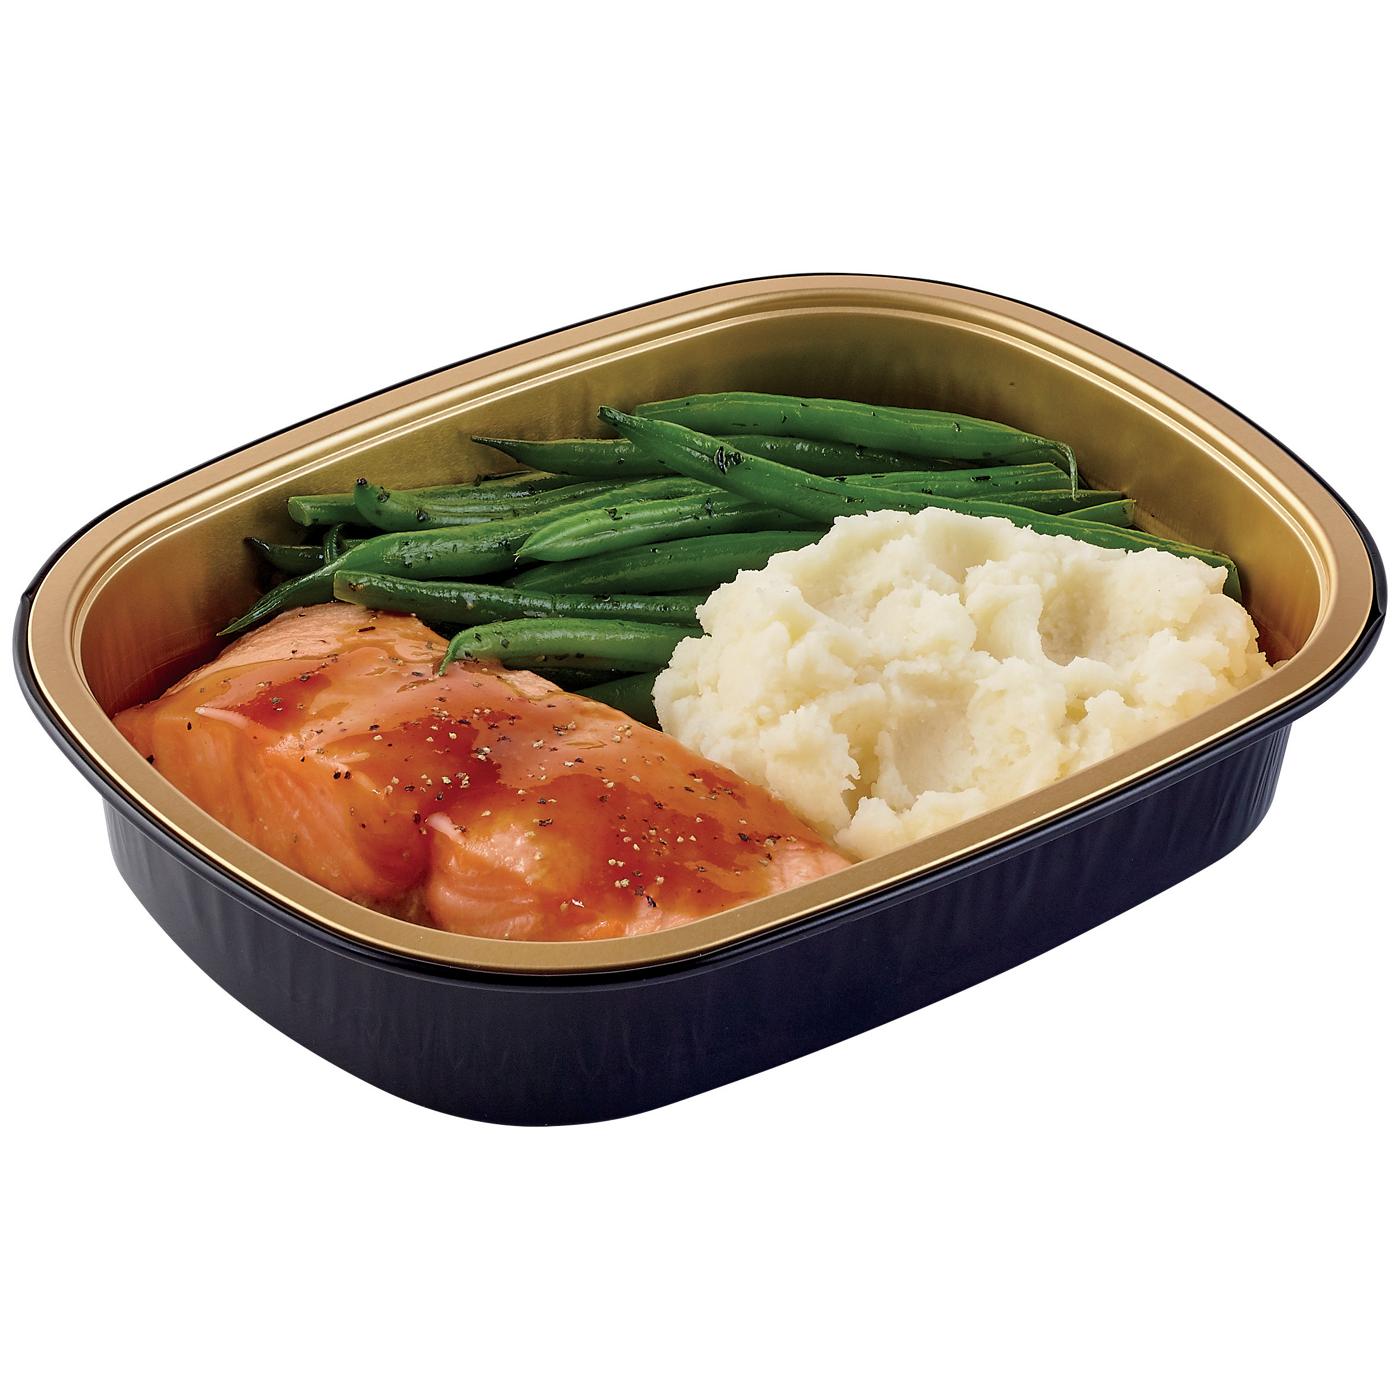 Meal Simple by H-E-B Honey BBQ Salmon, Green Beans & Mashed Potatoes; image 4 of 4